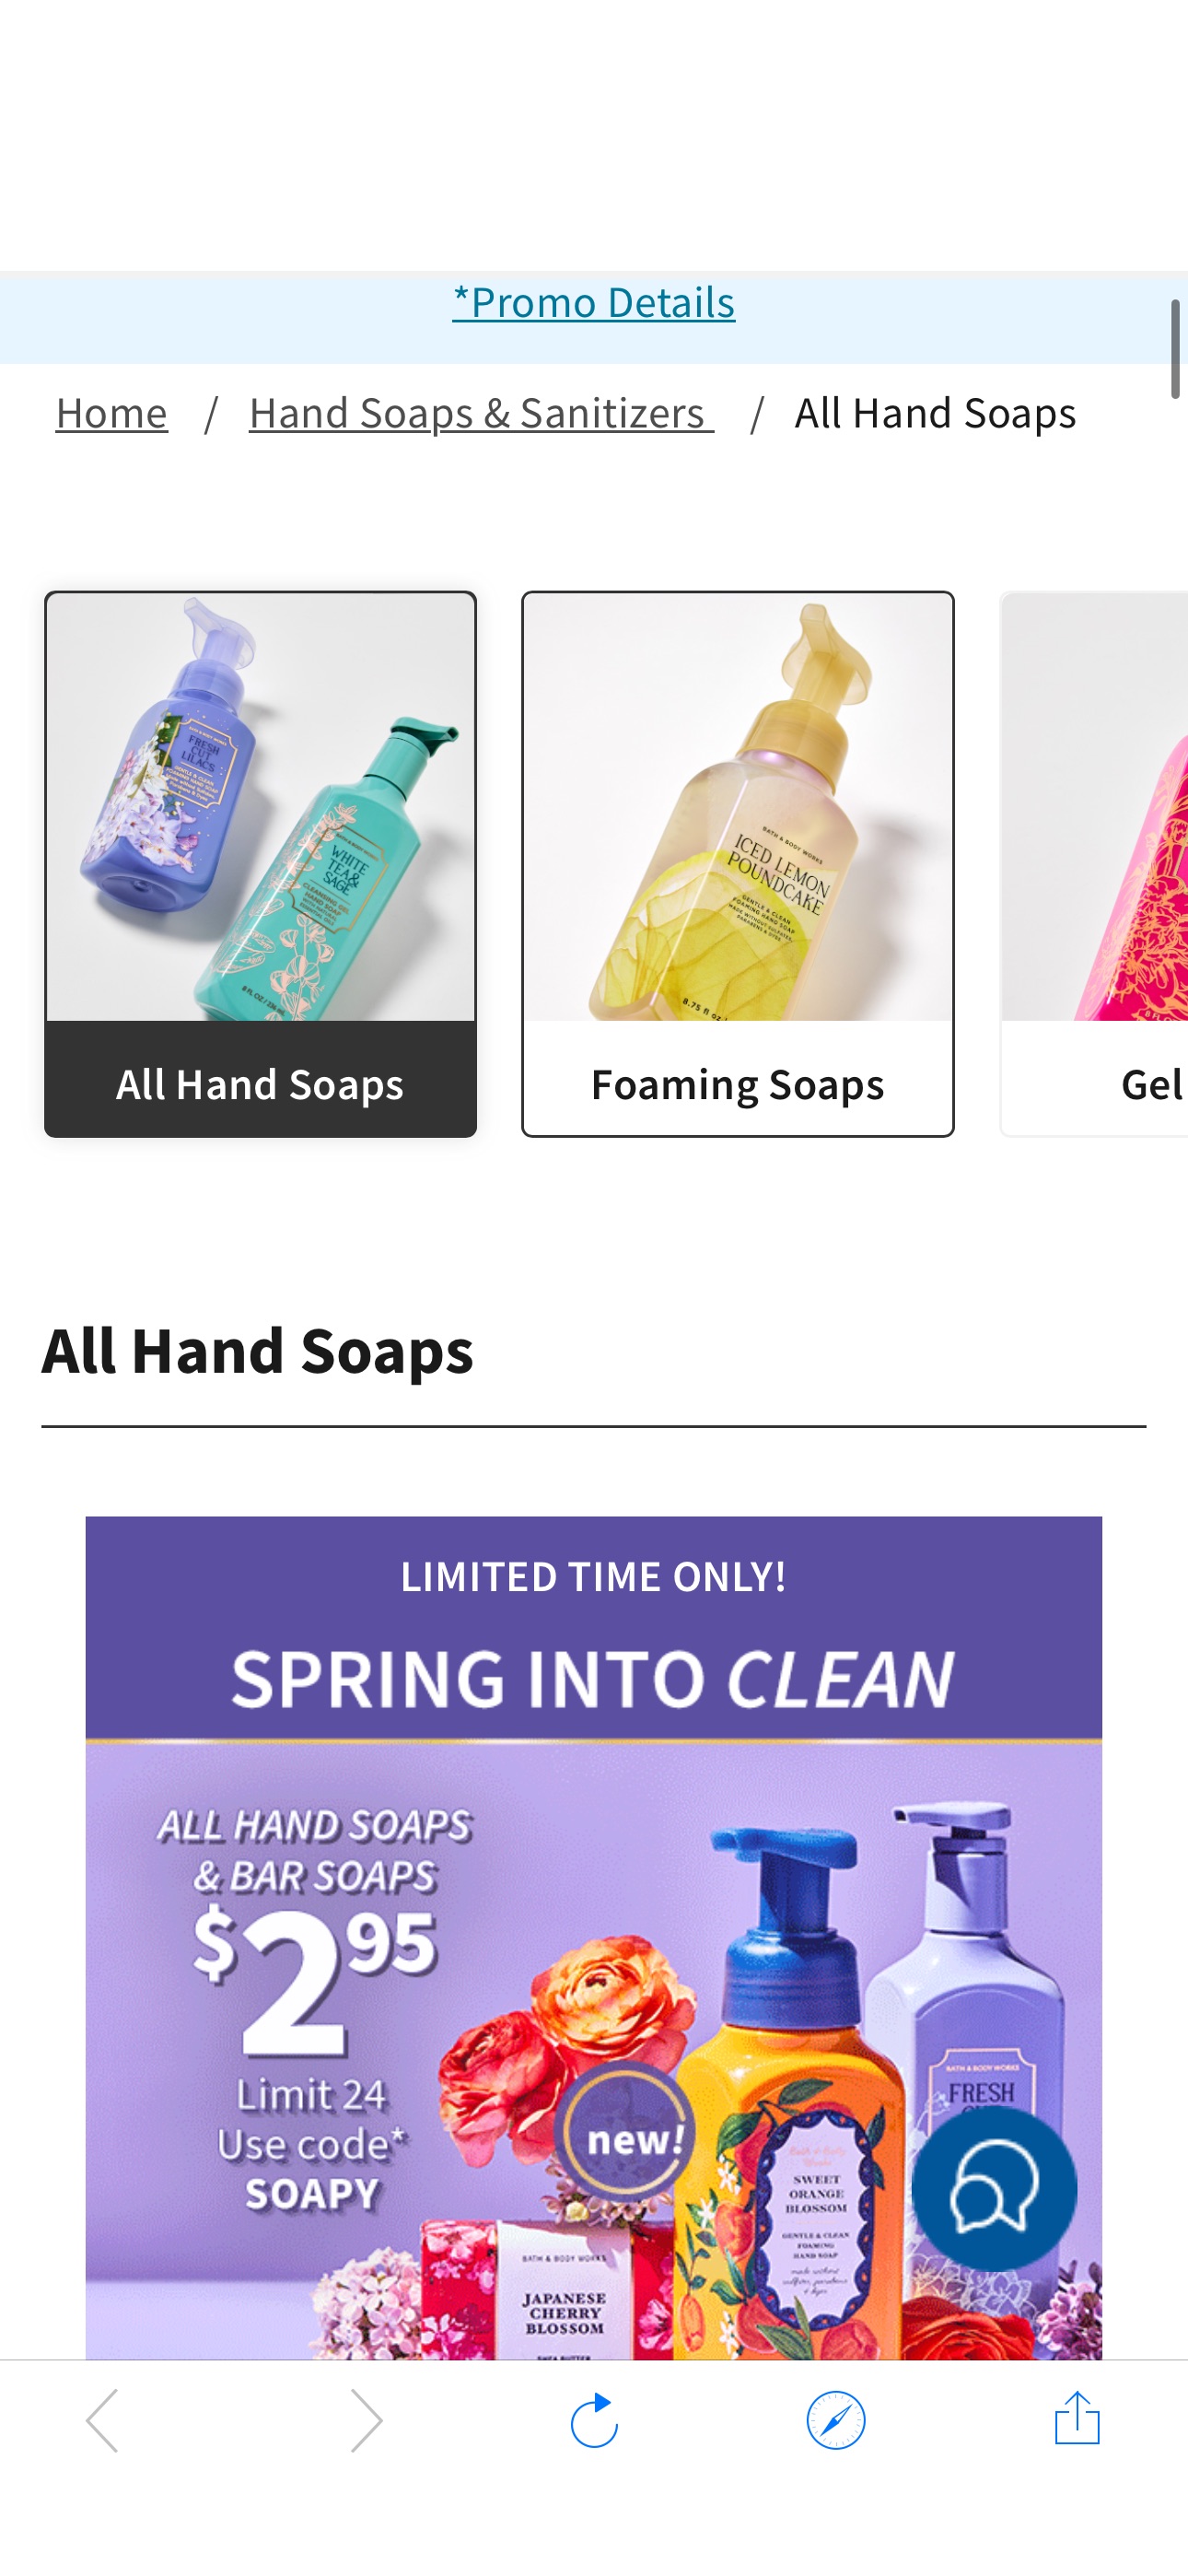 All Hand Soaps - Bath & Body Works $2.95 Soaps and $9.95 Soap Refills at Bath and Body Works
Use code SOAPY